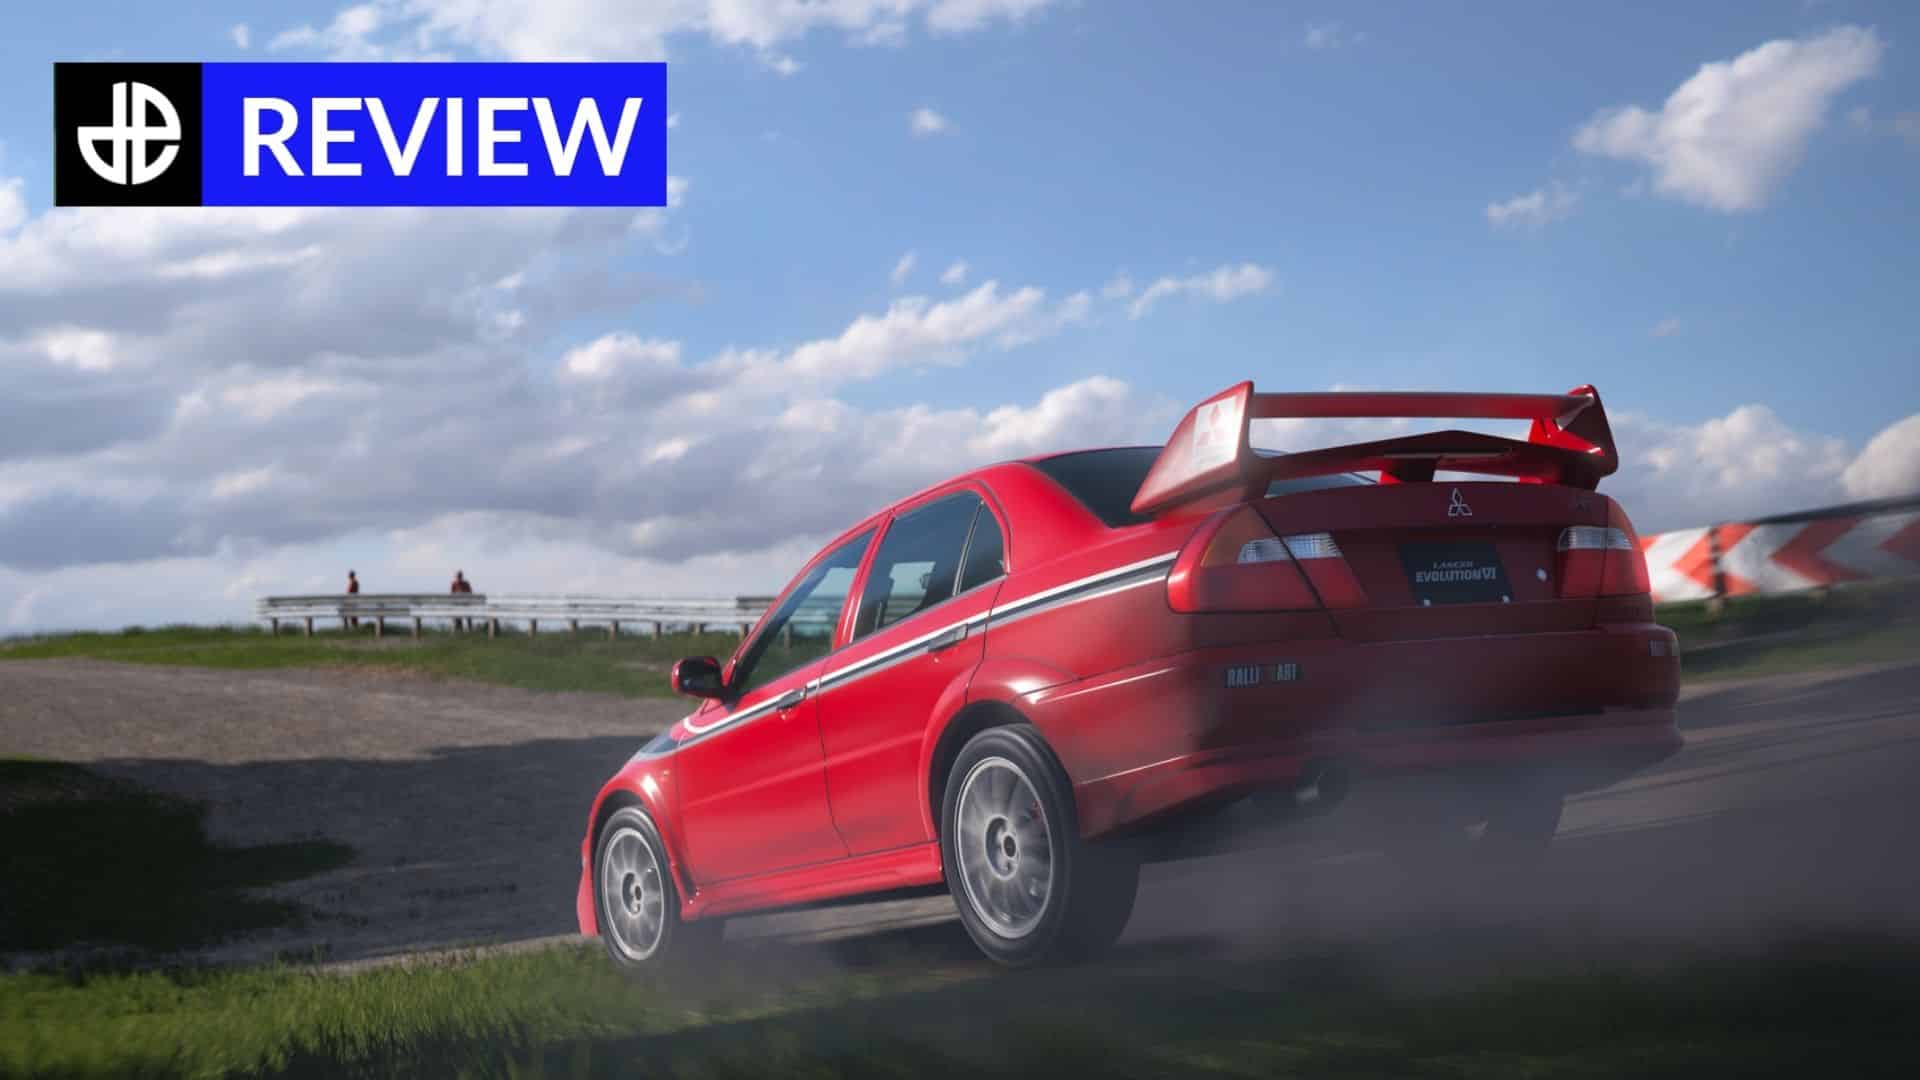 Gran Turismo 7 review – The best driving simulator on PlayStation